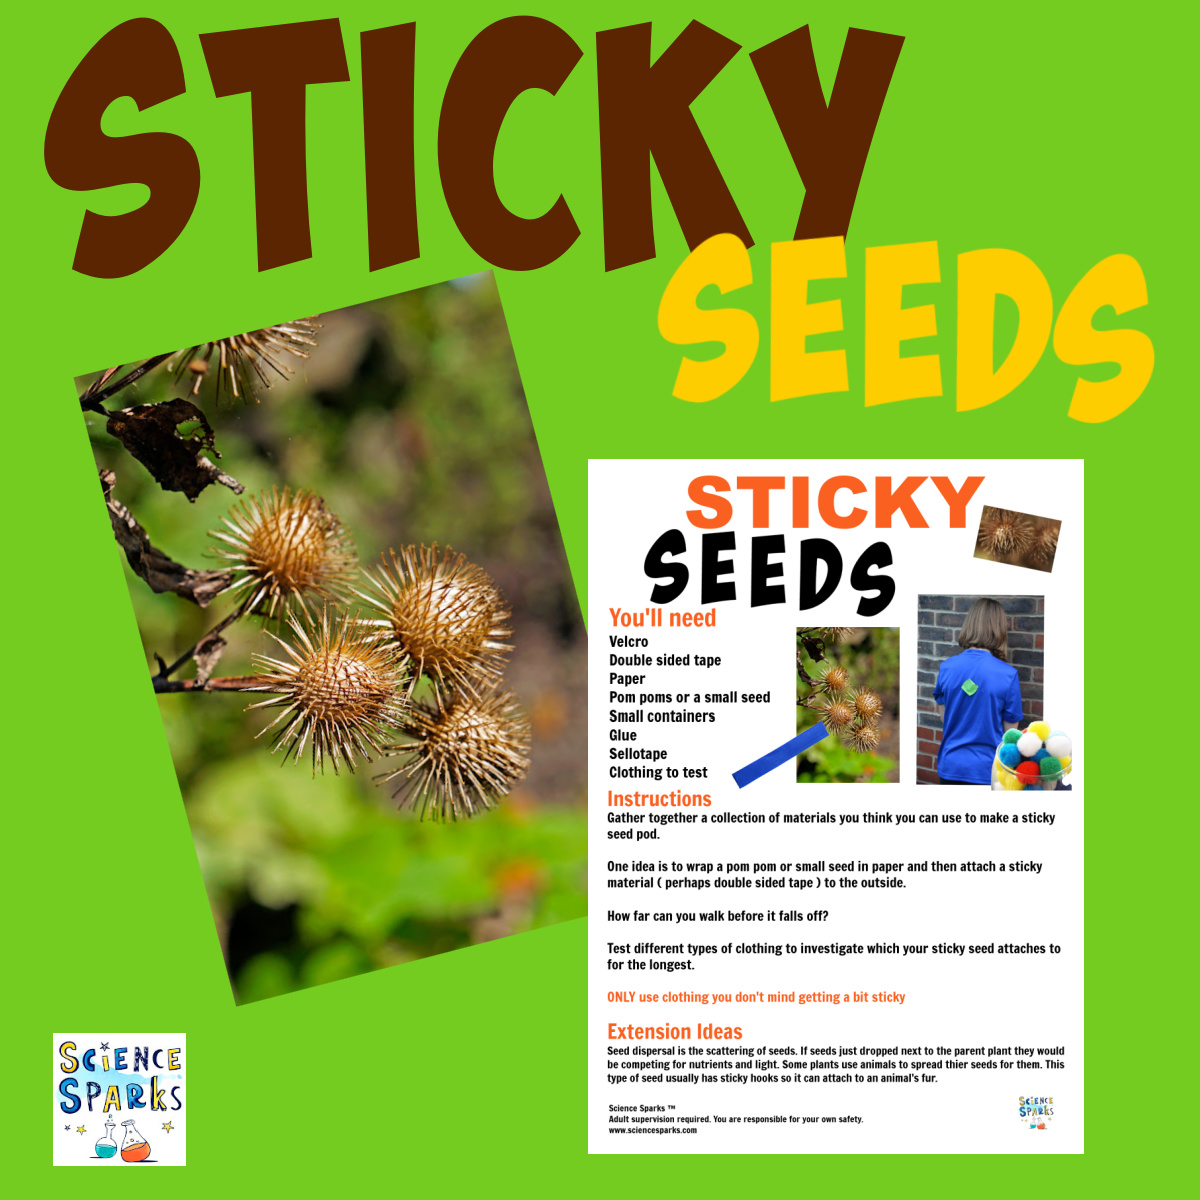 Sticky Seeds - a seed dispersal investigation